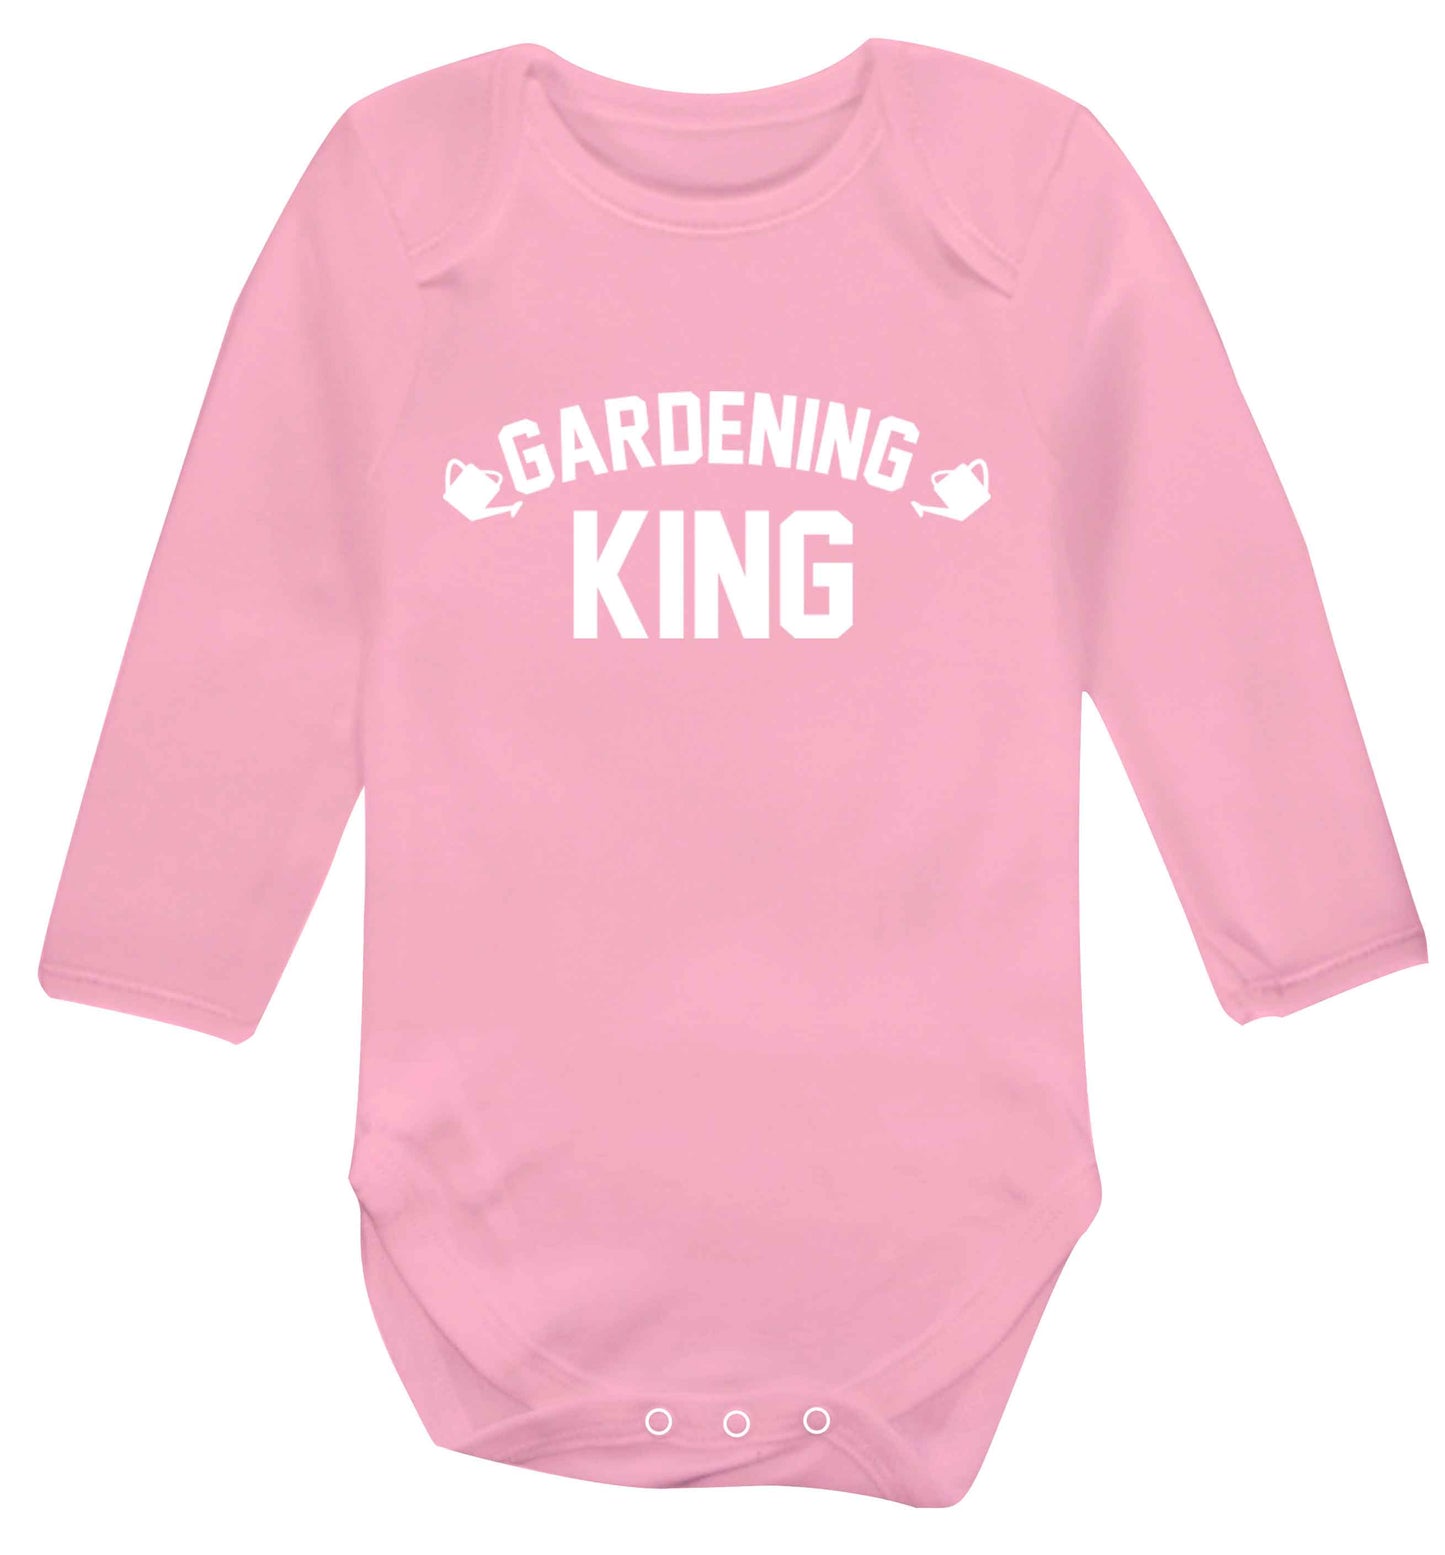 Gardening king Baby Vest long sleeved pale pink 6-12 months